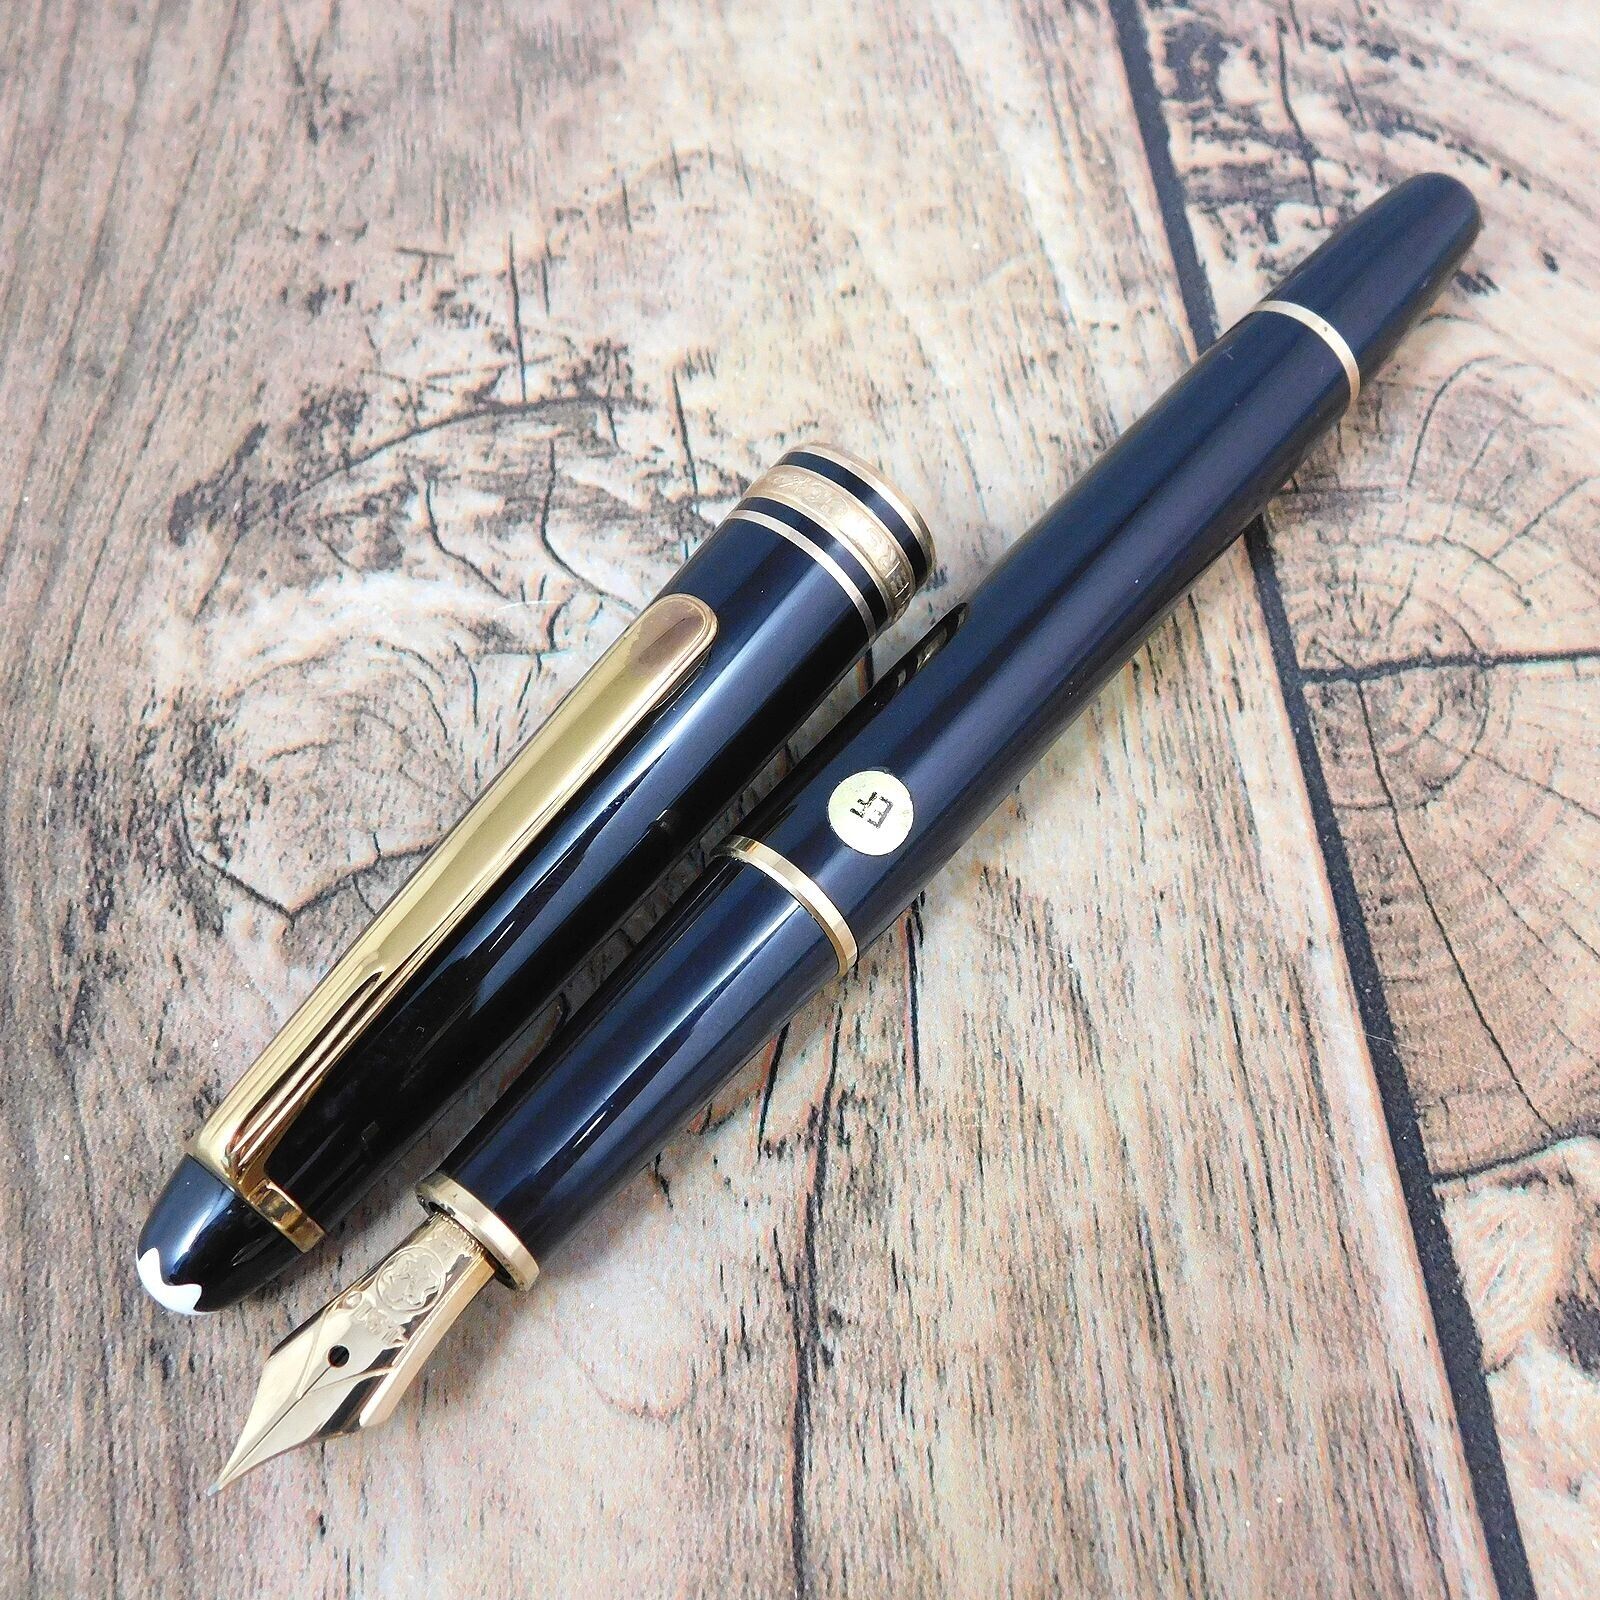 MONTBLANC MEISTERSTUCK 14K-585 FOUNTAIN PEN VINTAGE BLACK GOLD GERMANY A236